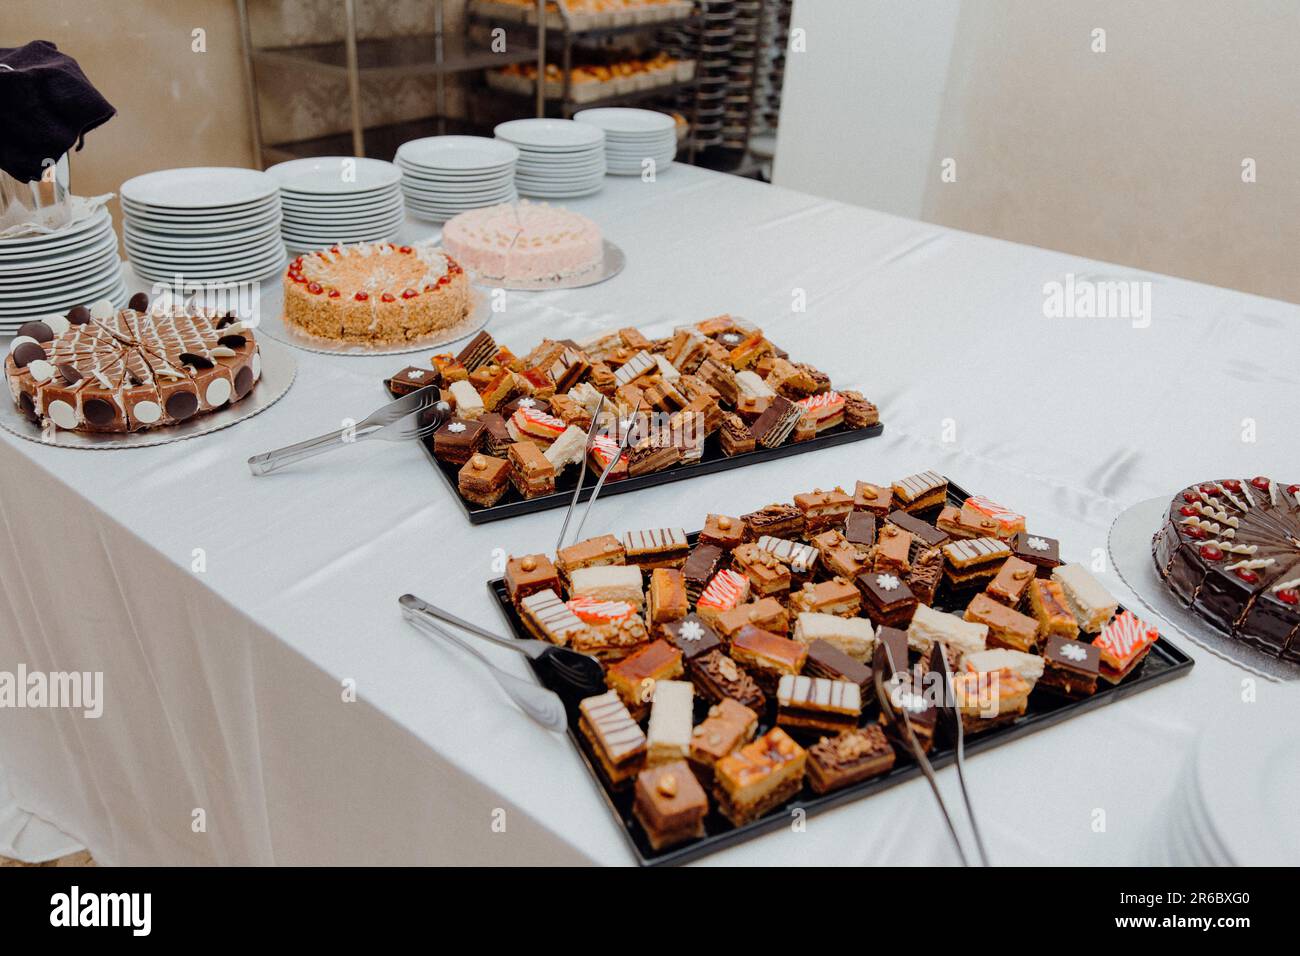 An array of delectable desserts on table Stock Photo